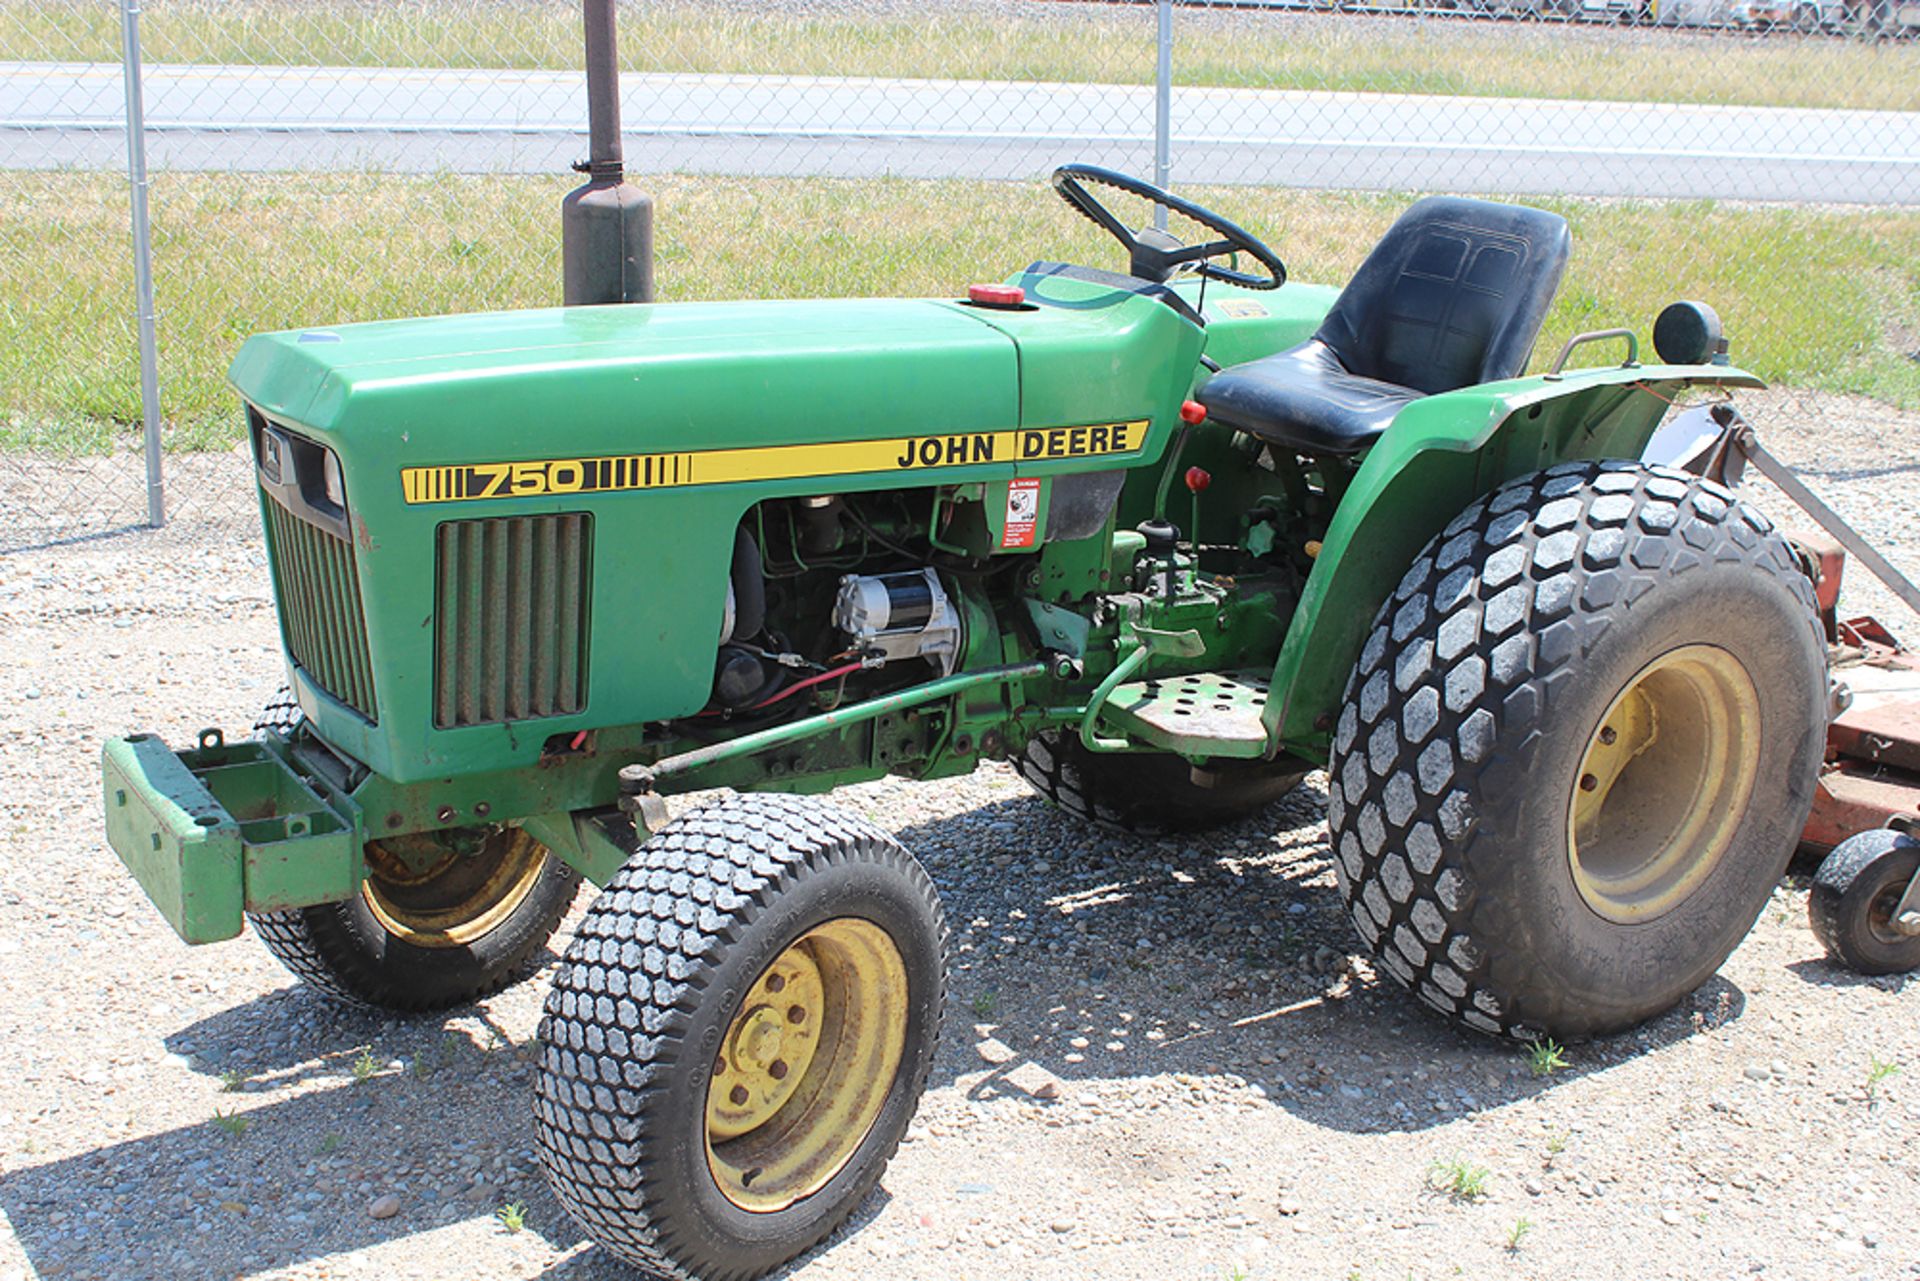 JOHN DEERE 750 DIESEL TRACTOR WITH 3 PT., PTO, 2719 HOURS WITH TURF TIRES